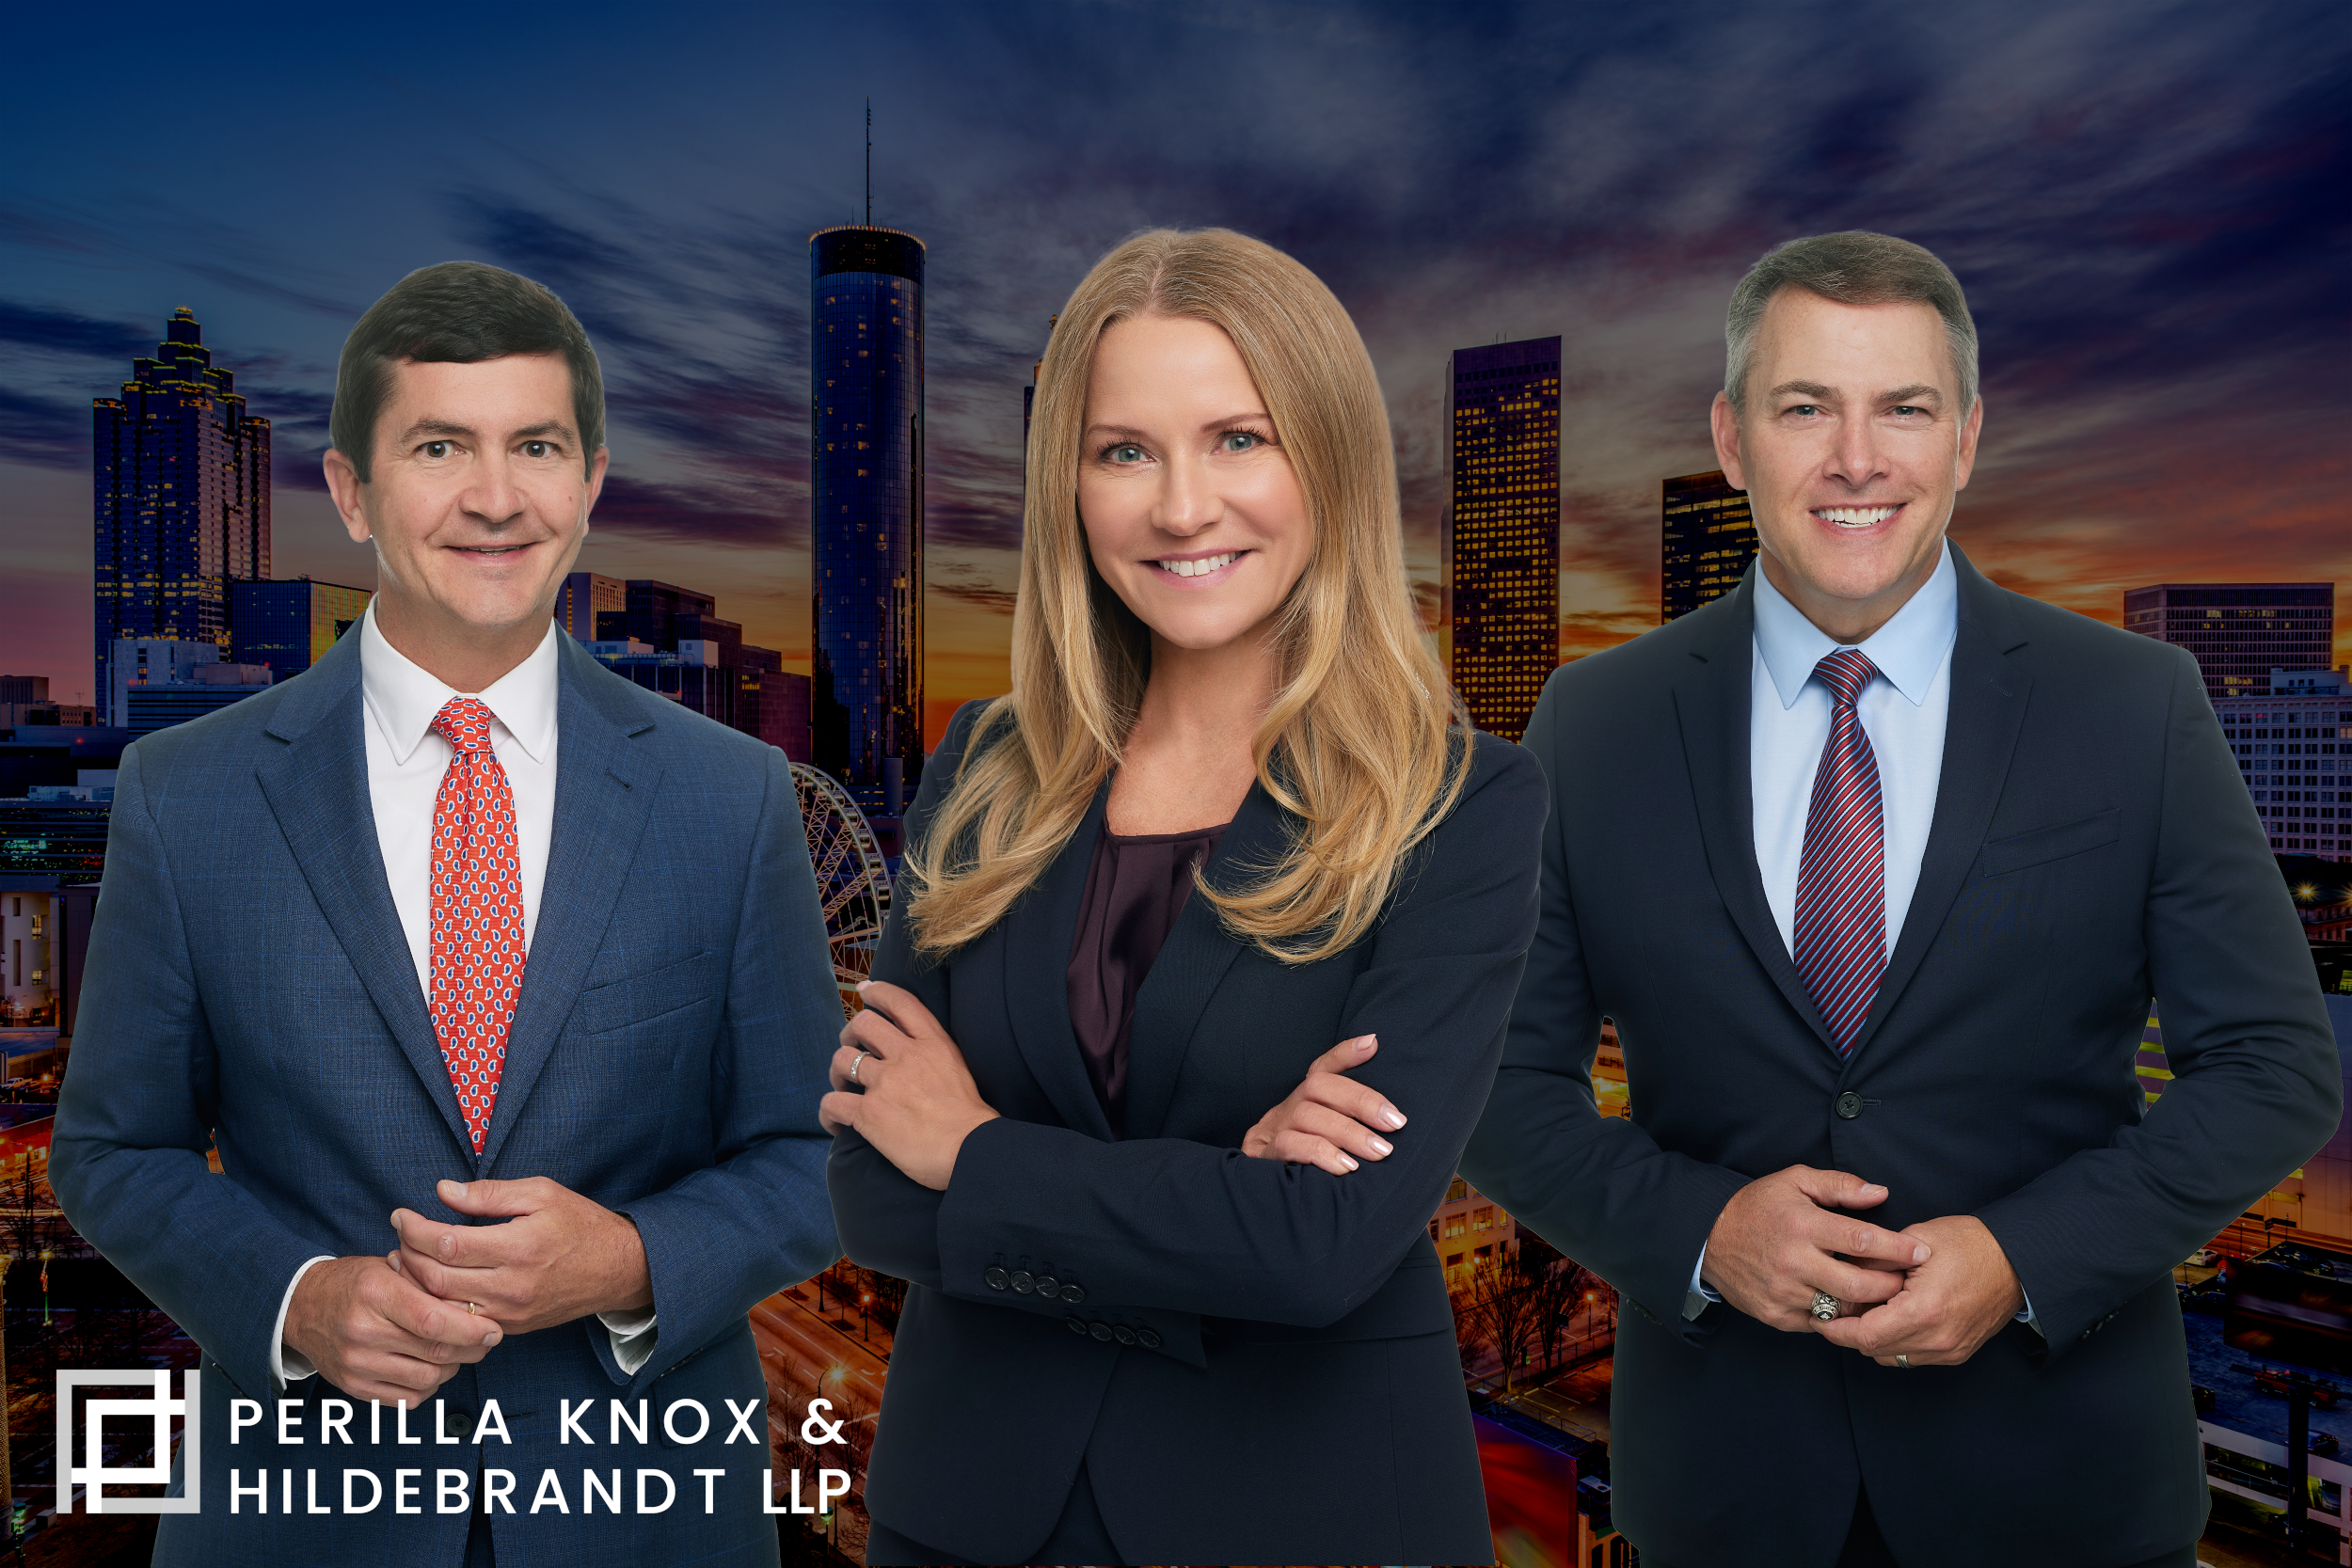 PKH Welcomes Three Attorneys and Expands Litigation & Trademark Capabilities